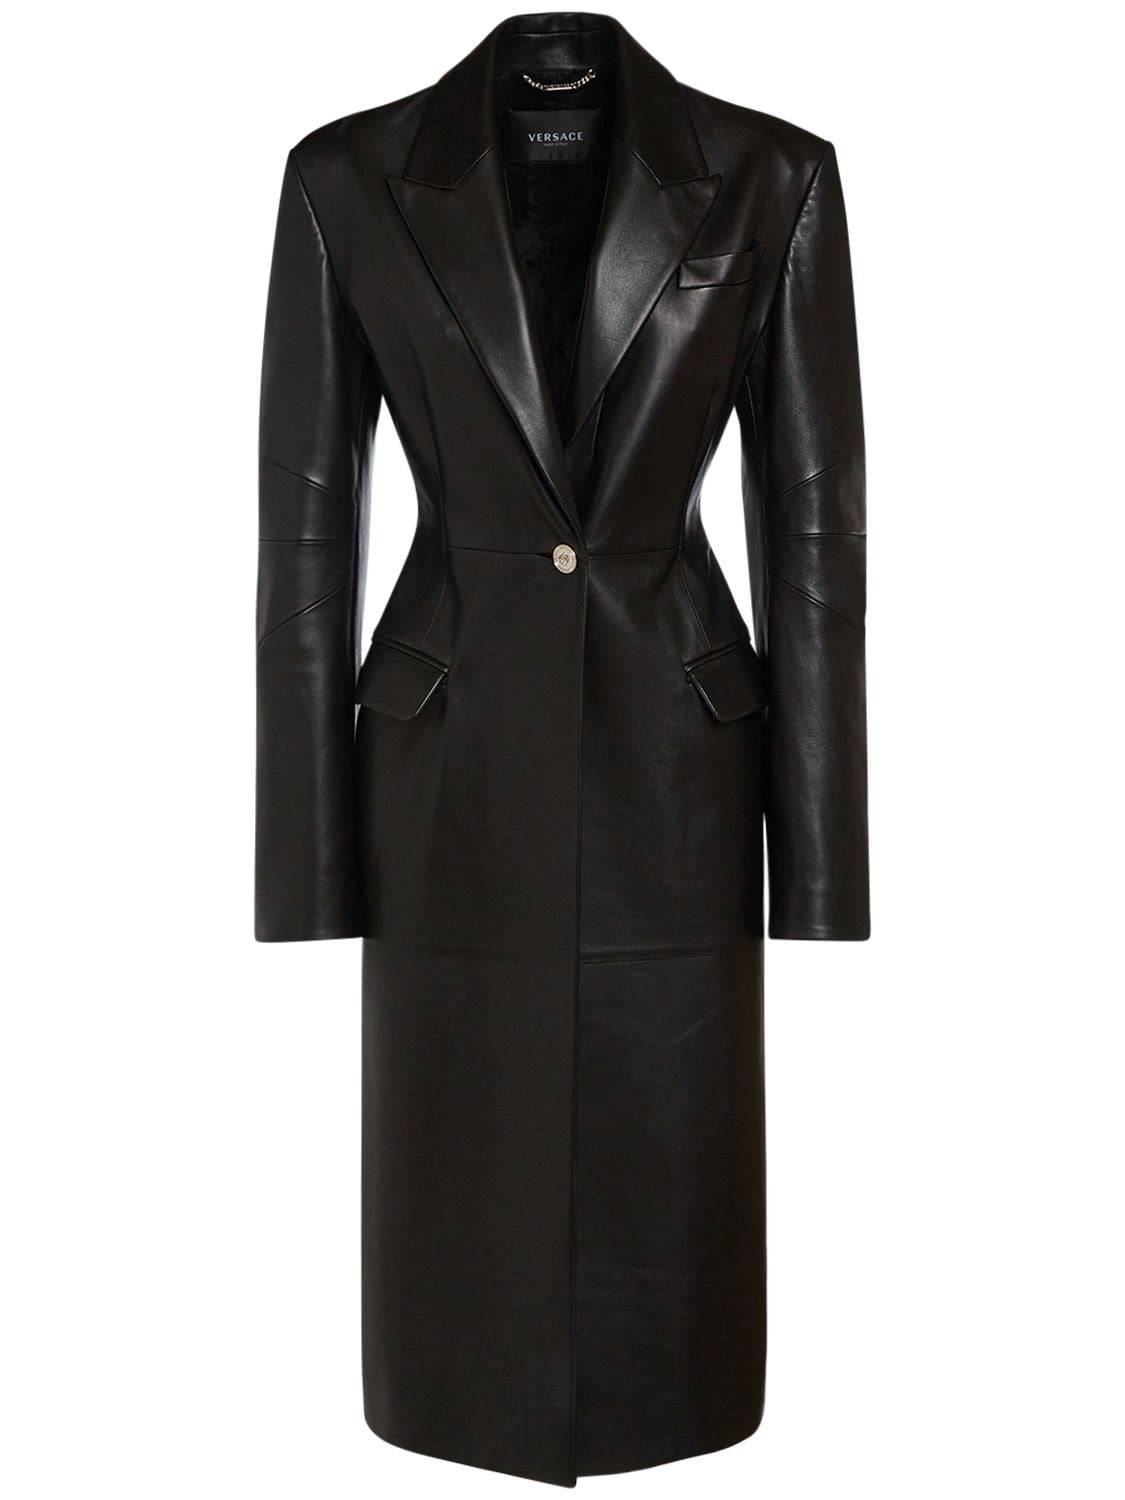 VERSACE LEATHER SINGLE BREASTED LONG COAT